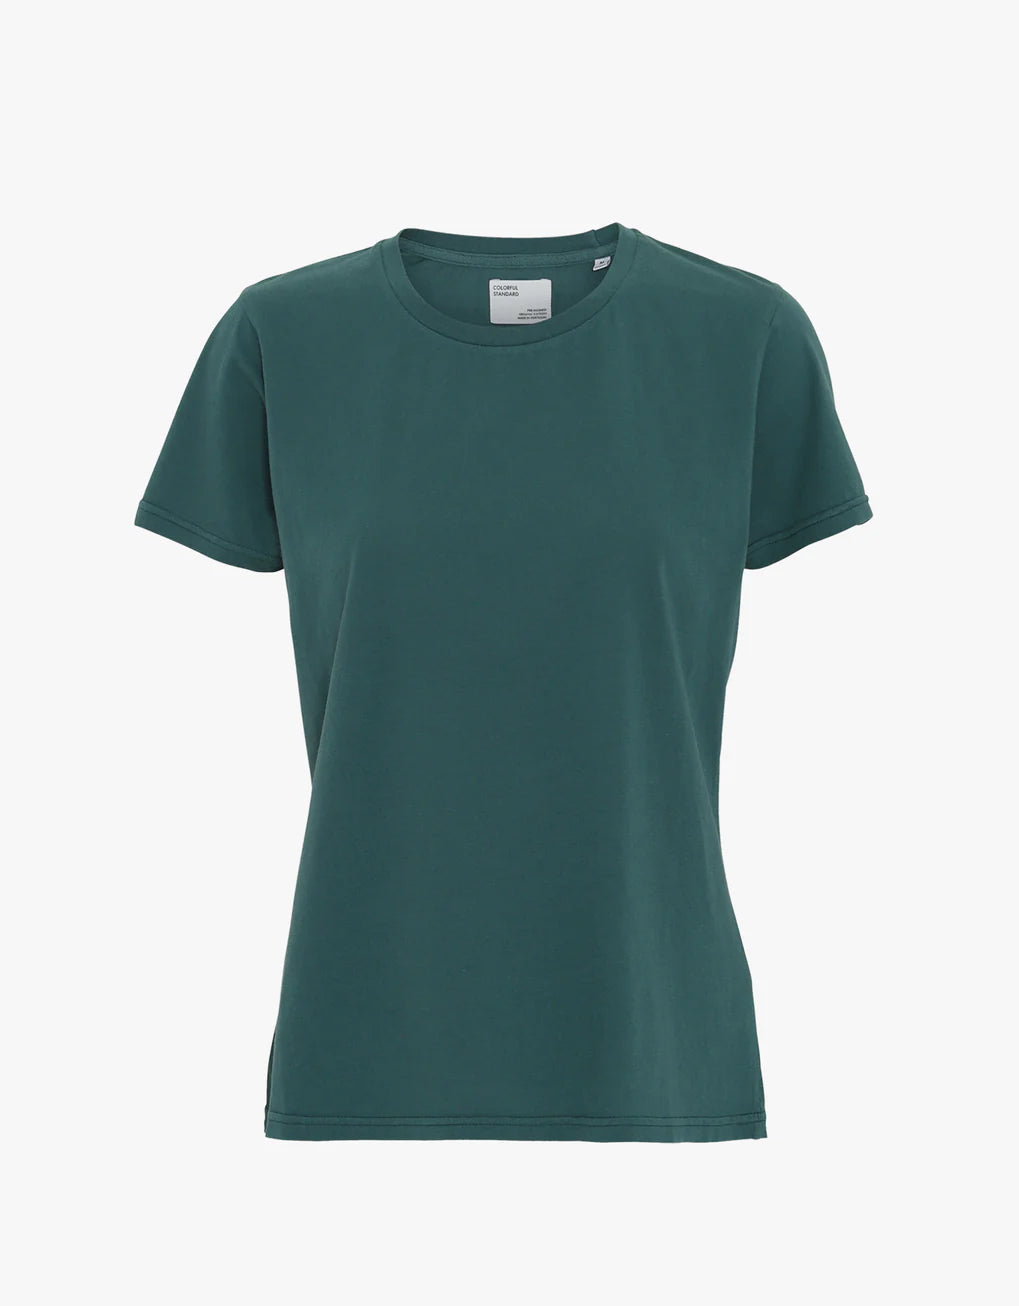 A machine washable women's Light Organic Tee from Colorful Standard.